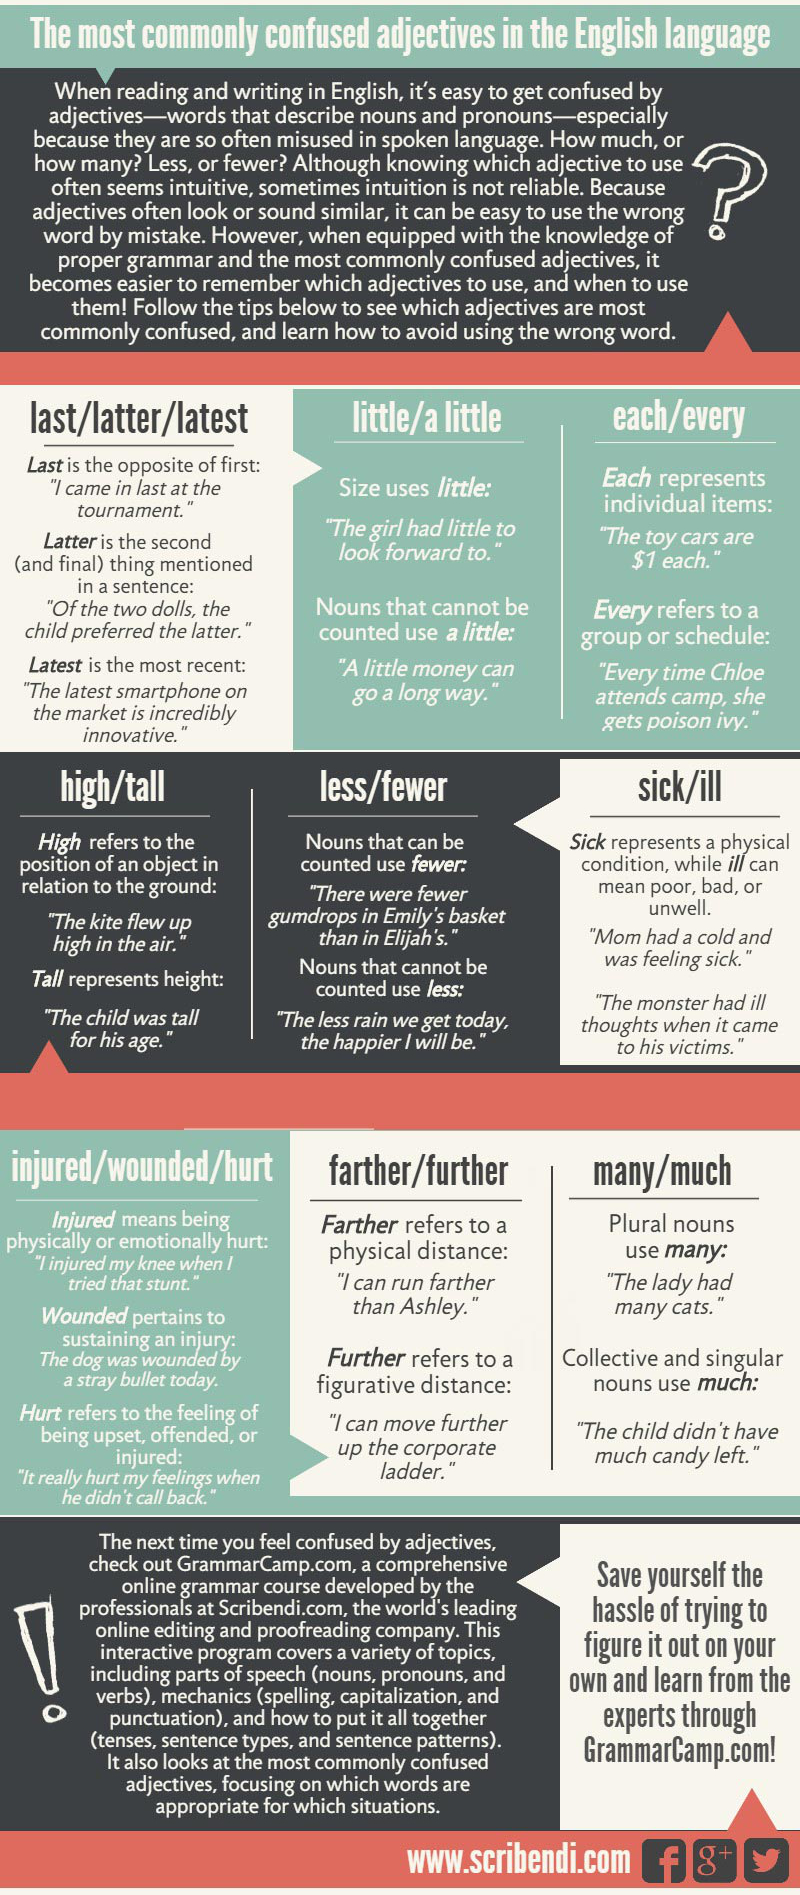 Commonly confused adjectives.